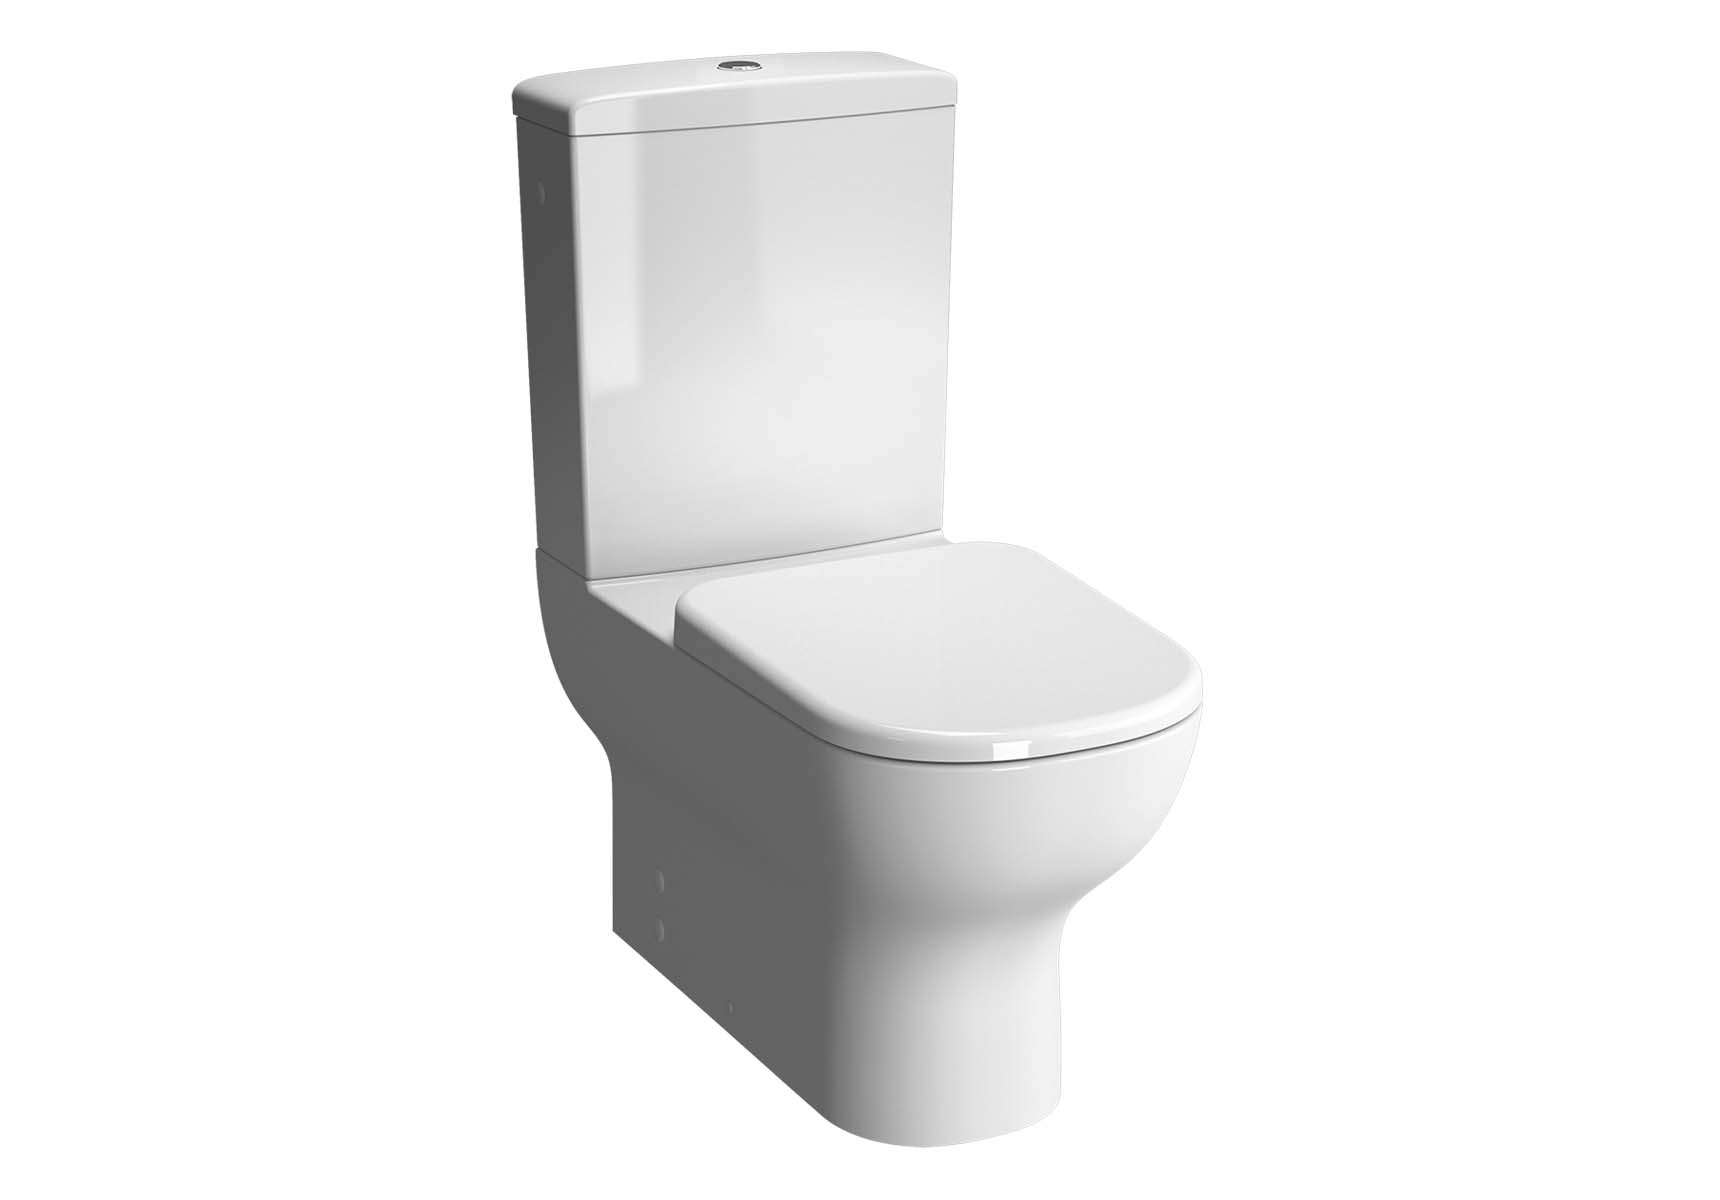 D-Light Rim-Ex Open Back Close-Coupled WC Pan (without Bidet Pipe)